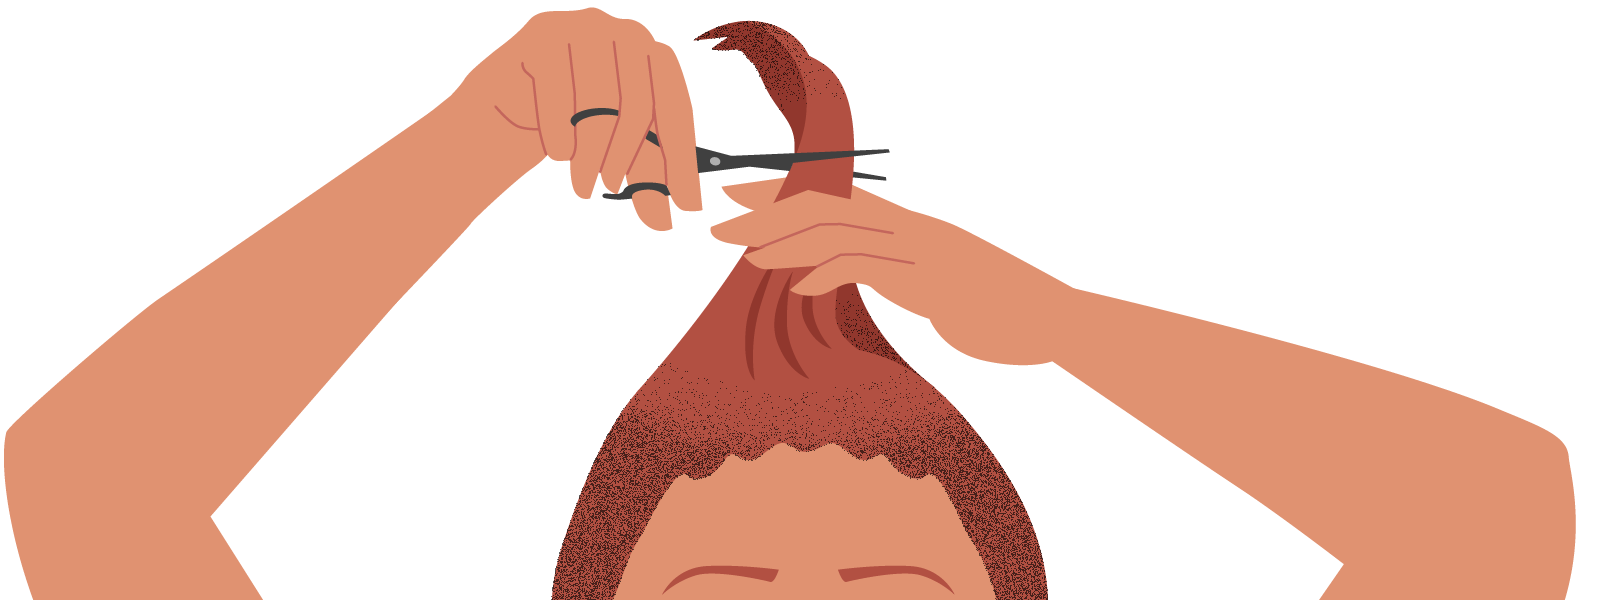 how to cut my hair with clippers